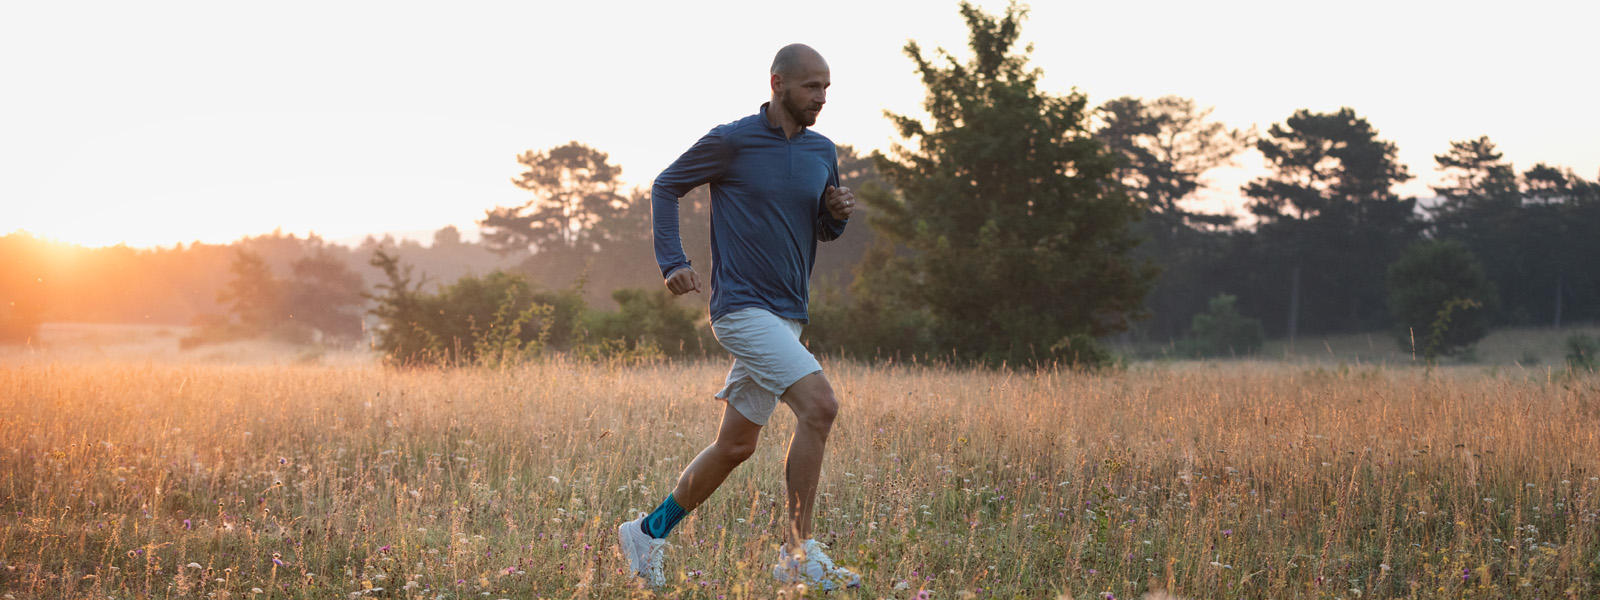 Man with ankle bandage runs at dusk over a meadow with a high grass